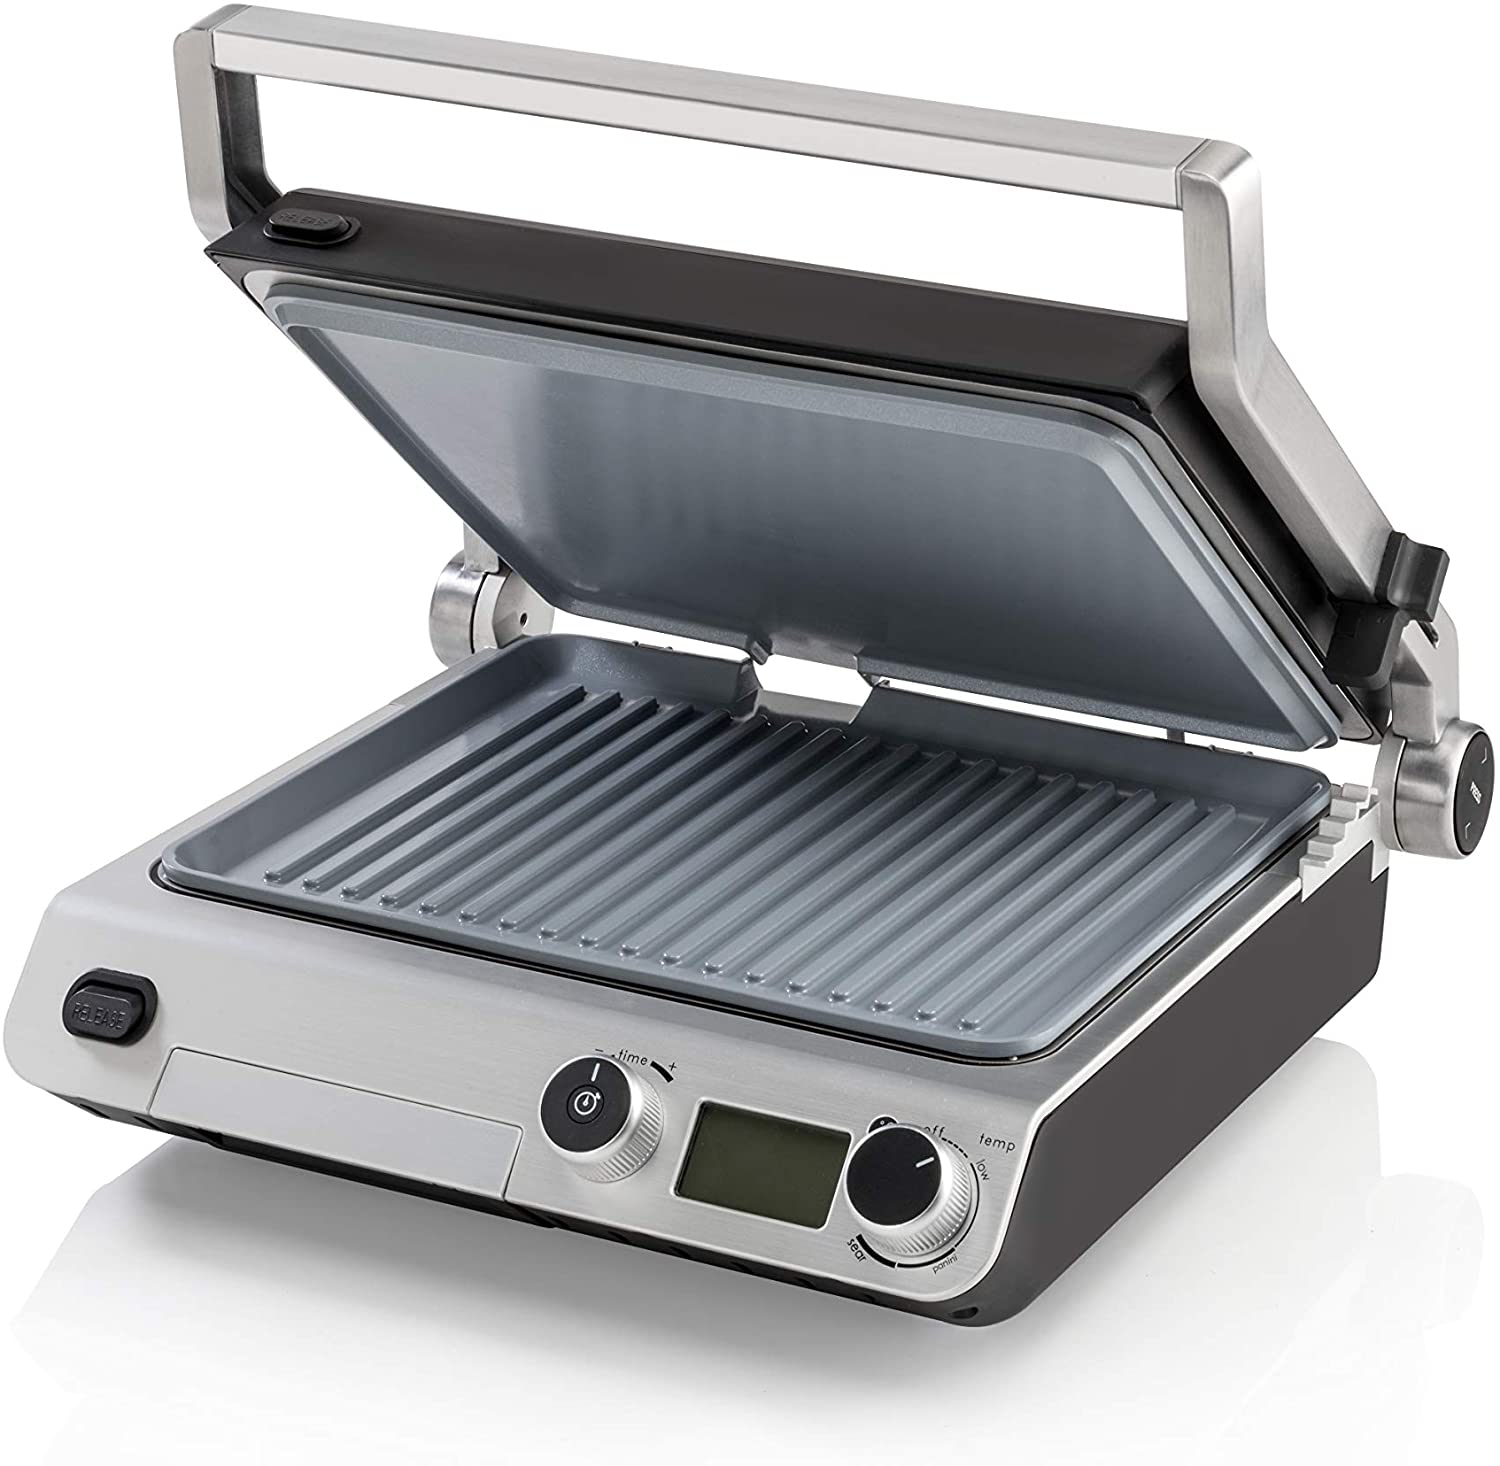 Espressions Smart Grill Up To 250 Degrees for Paninis, Sandwiches and Table Grills